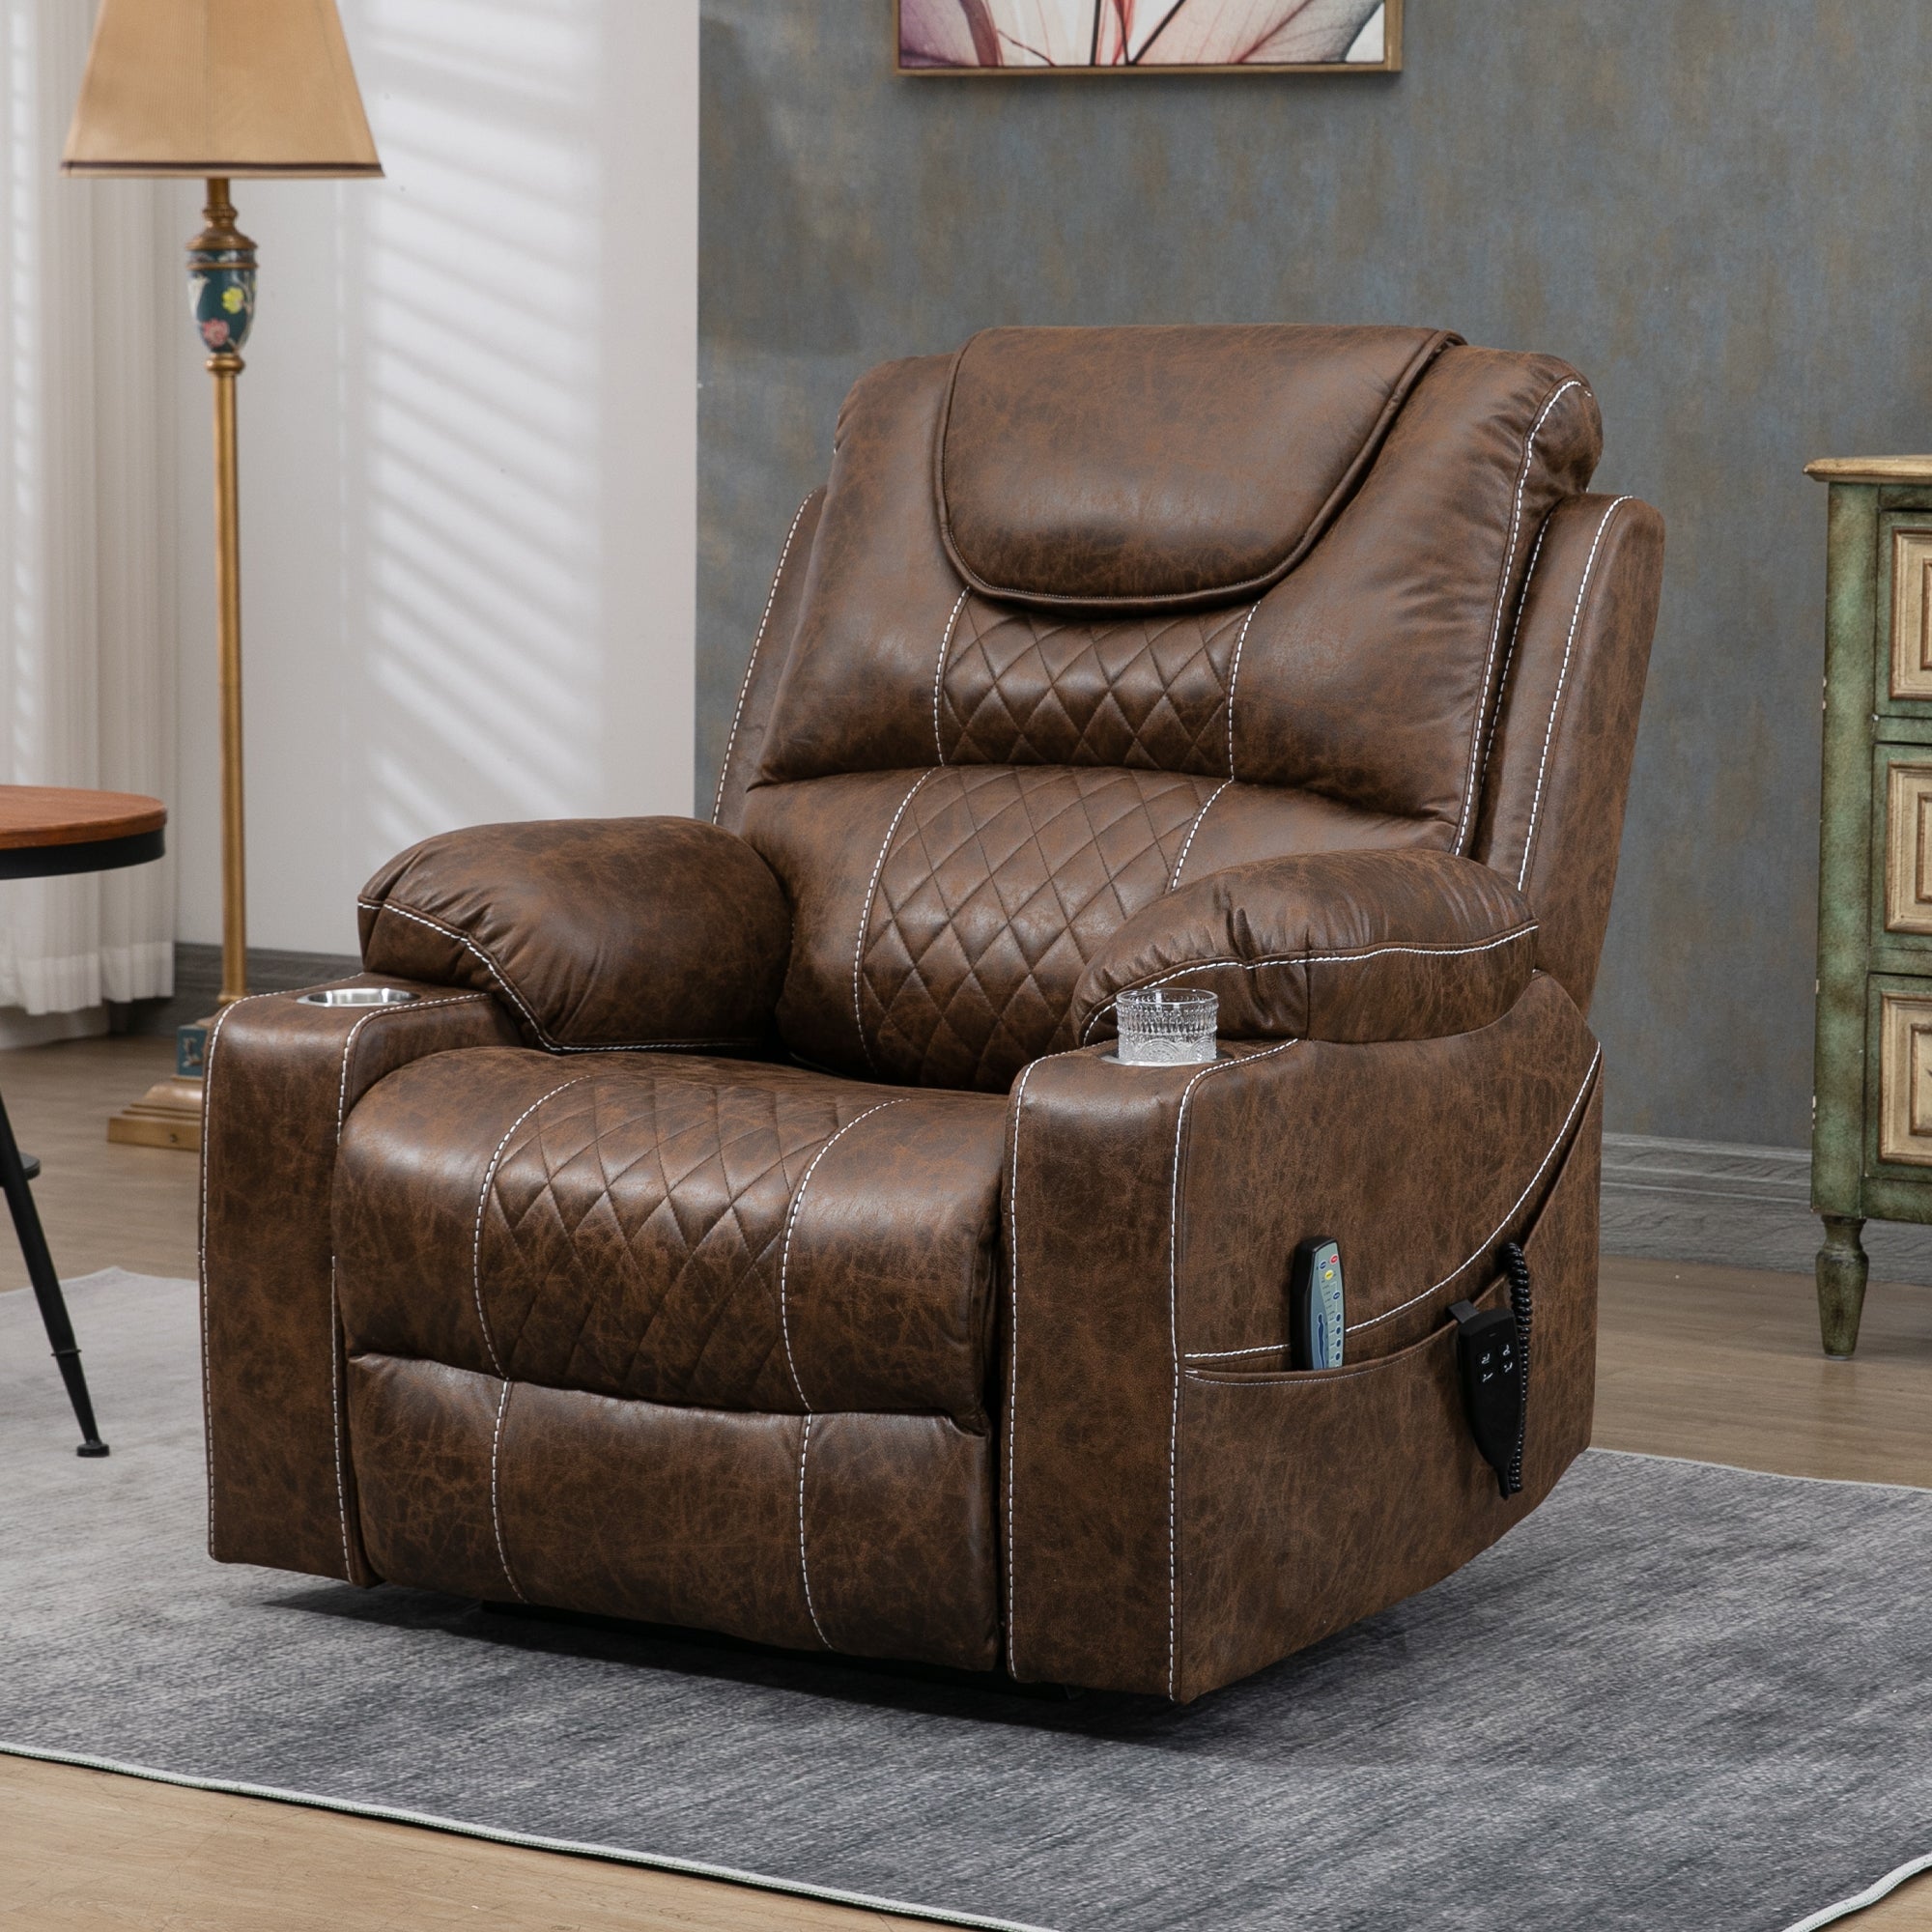 uhomepro Oversized Massage Recliner Chair with Heat, Large